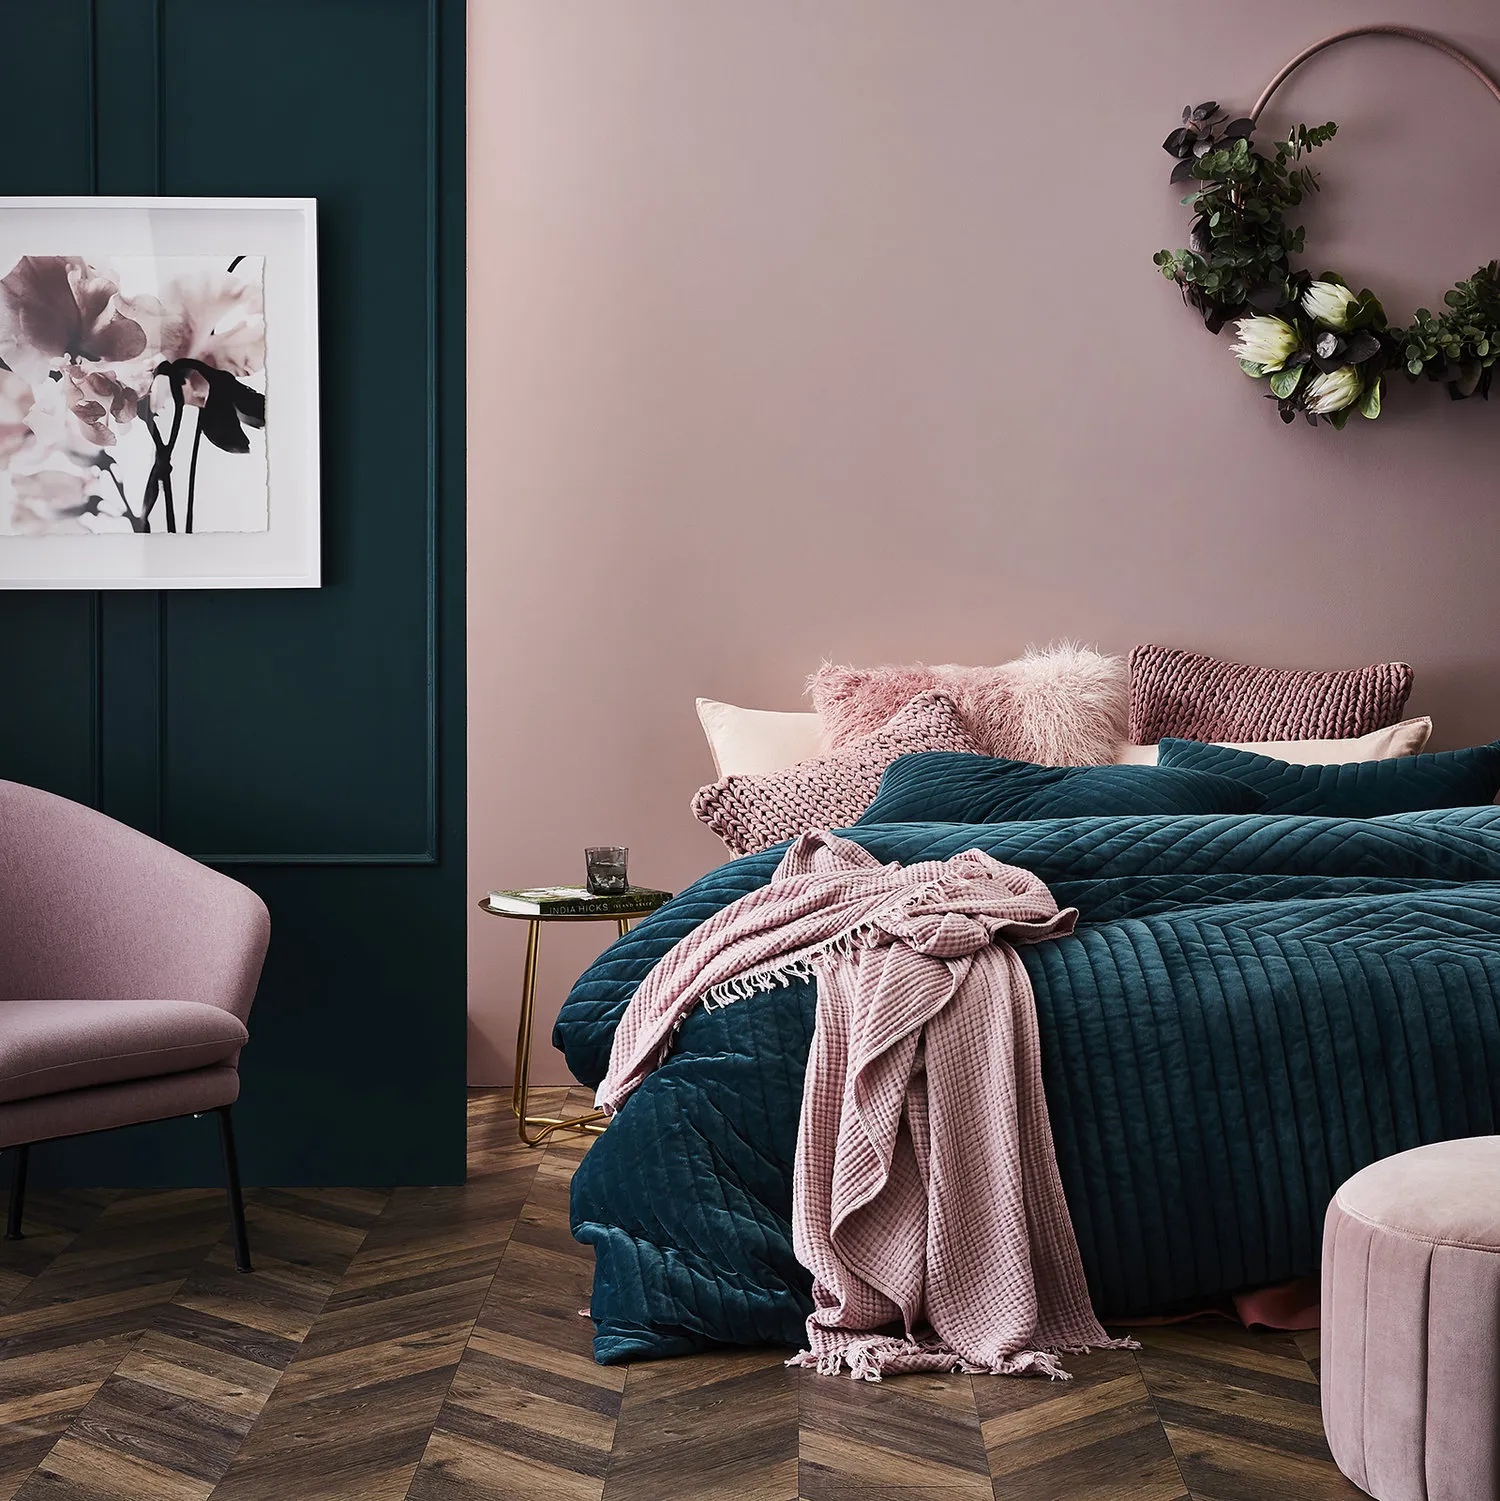 Two-colour combination for bedroom walls 2022 - Emily May